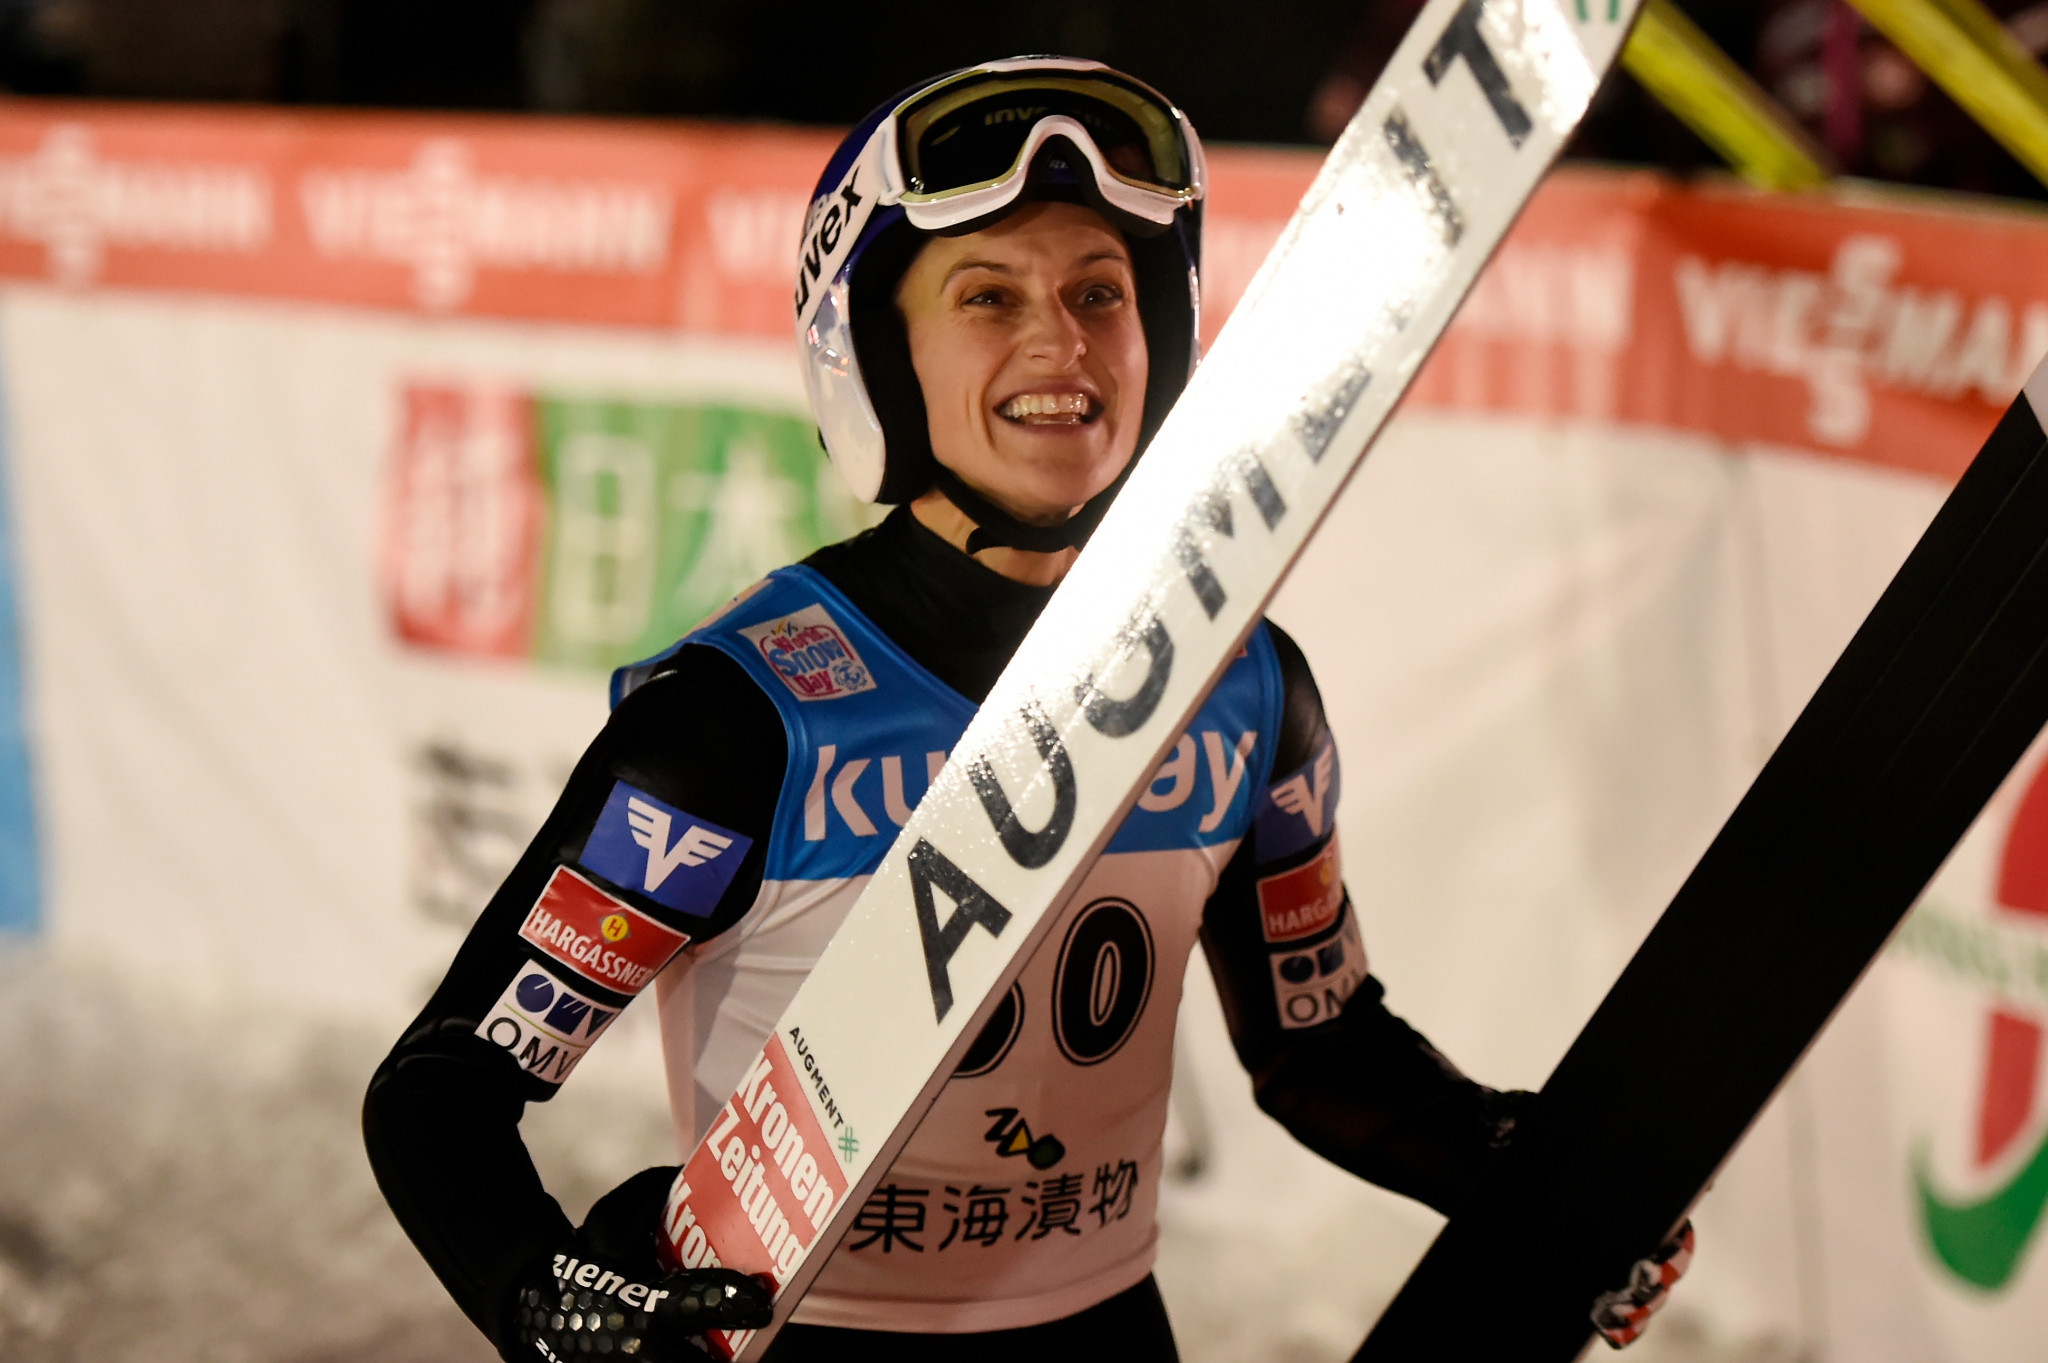 Eva Pinkelnig of Austria maintained her place in second in the FIS Ski Jumping World Cup standings ©Getty Images